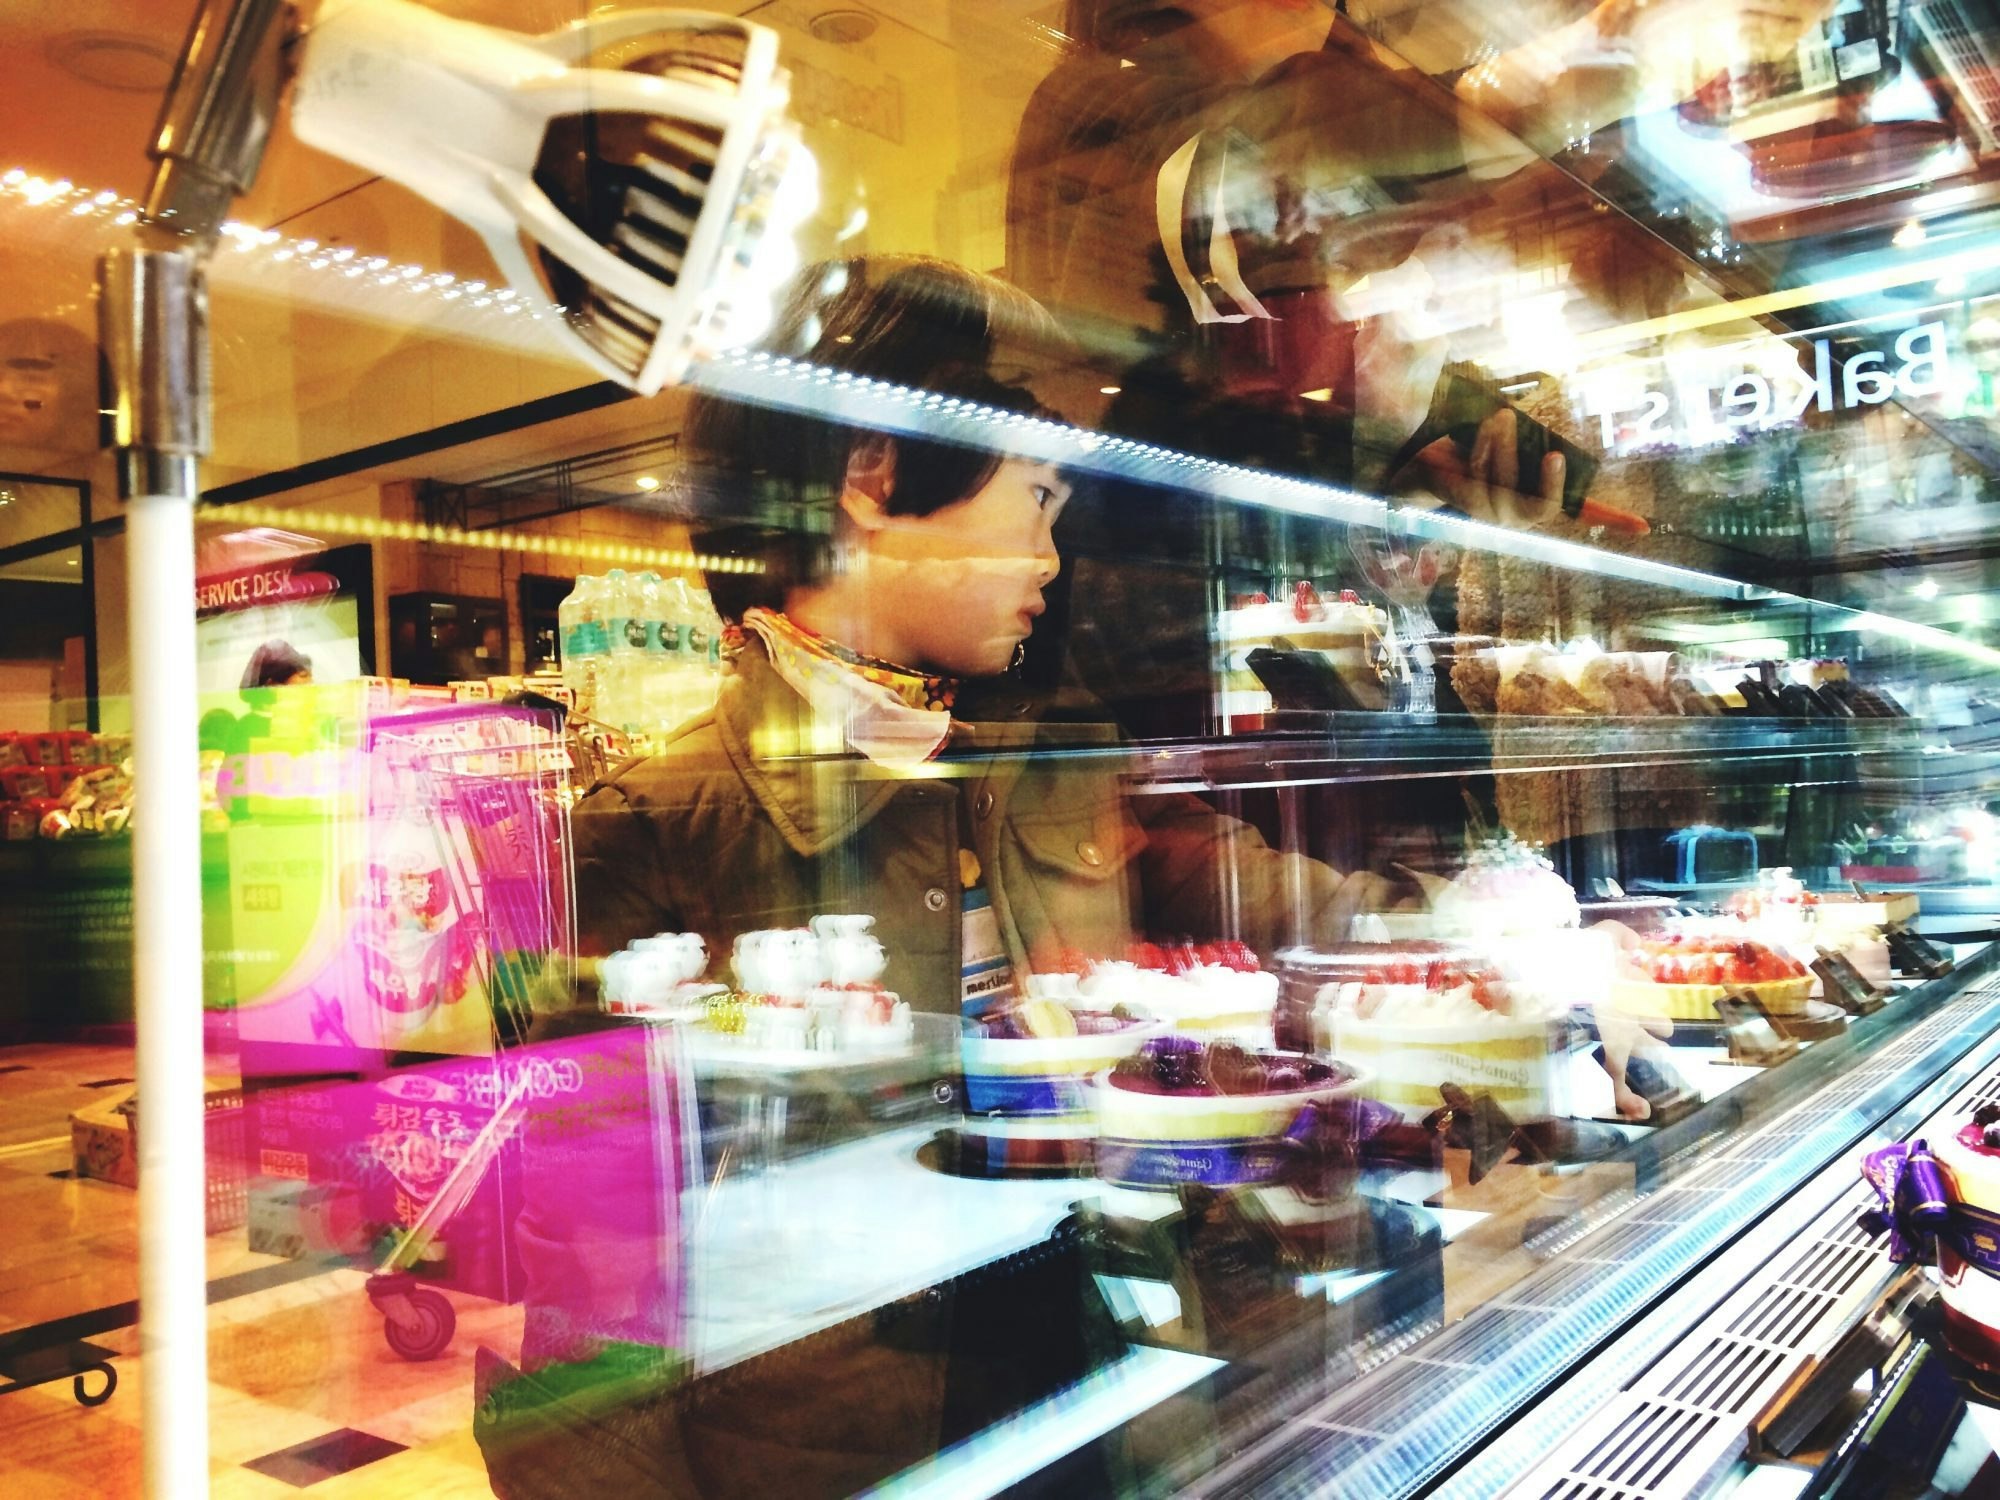 Travel News - Little Boy Looking At Cakes At Bakery Store